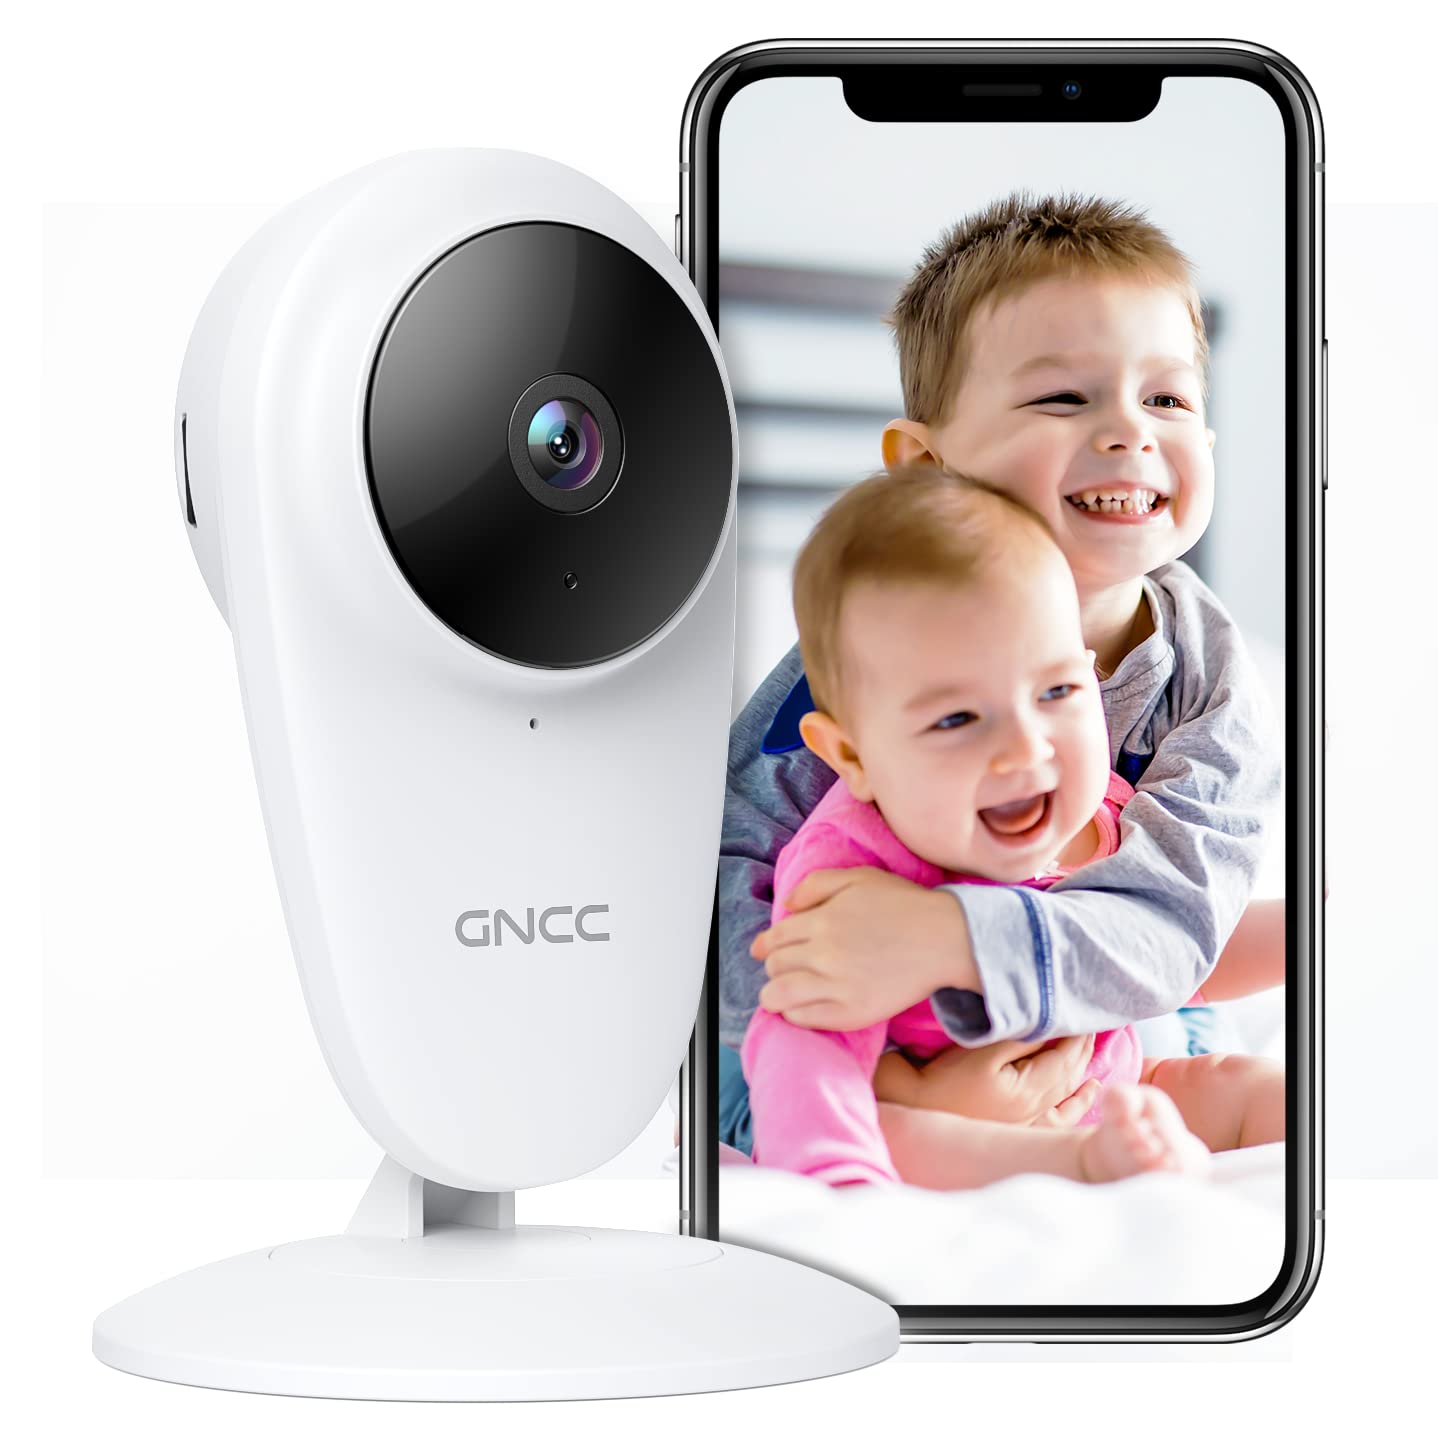 Baby Monitor with Camera and Night Vision, 1080P Baby Camera Monitor, Motion & Sound Detection, Infrared Night Vision, Two Way Audio, Works with Alexa, GNCC C1